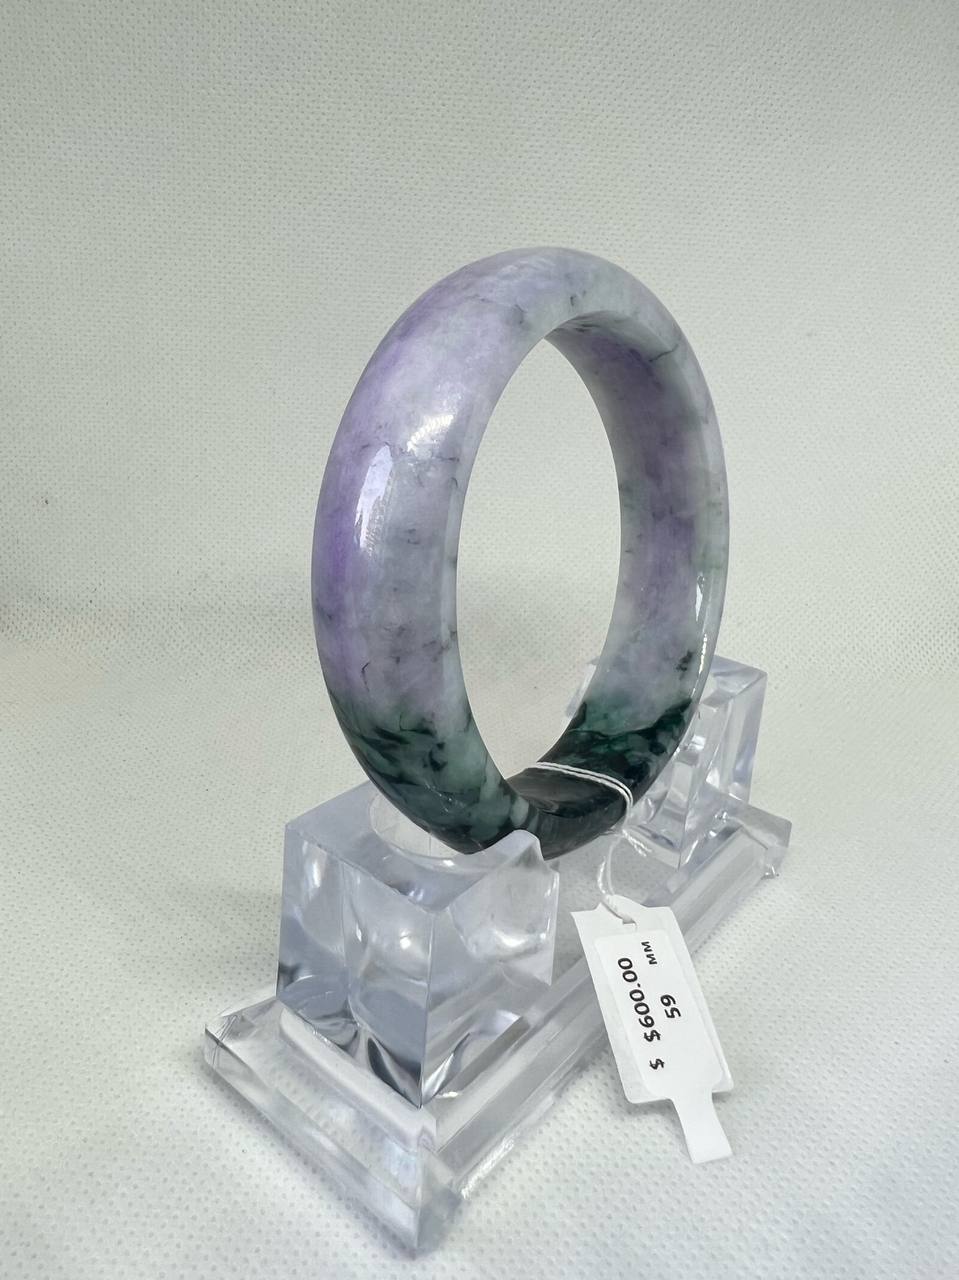 Grade A Natural Jade Bangle with certificate #36900